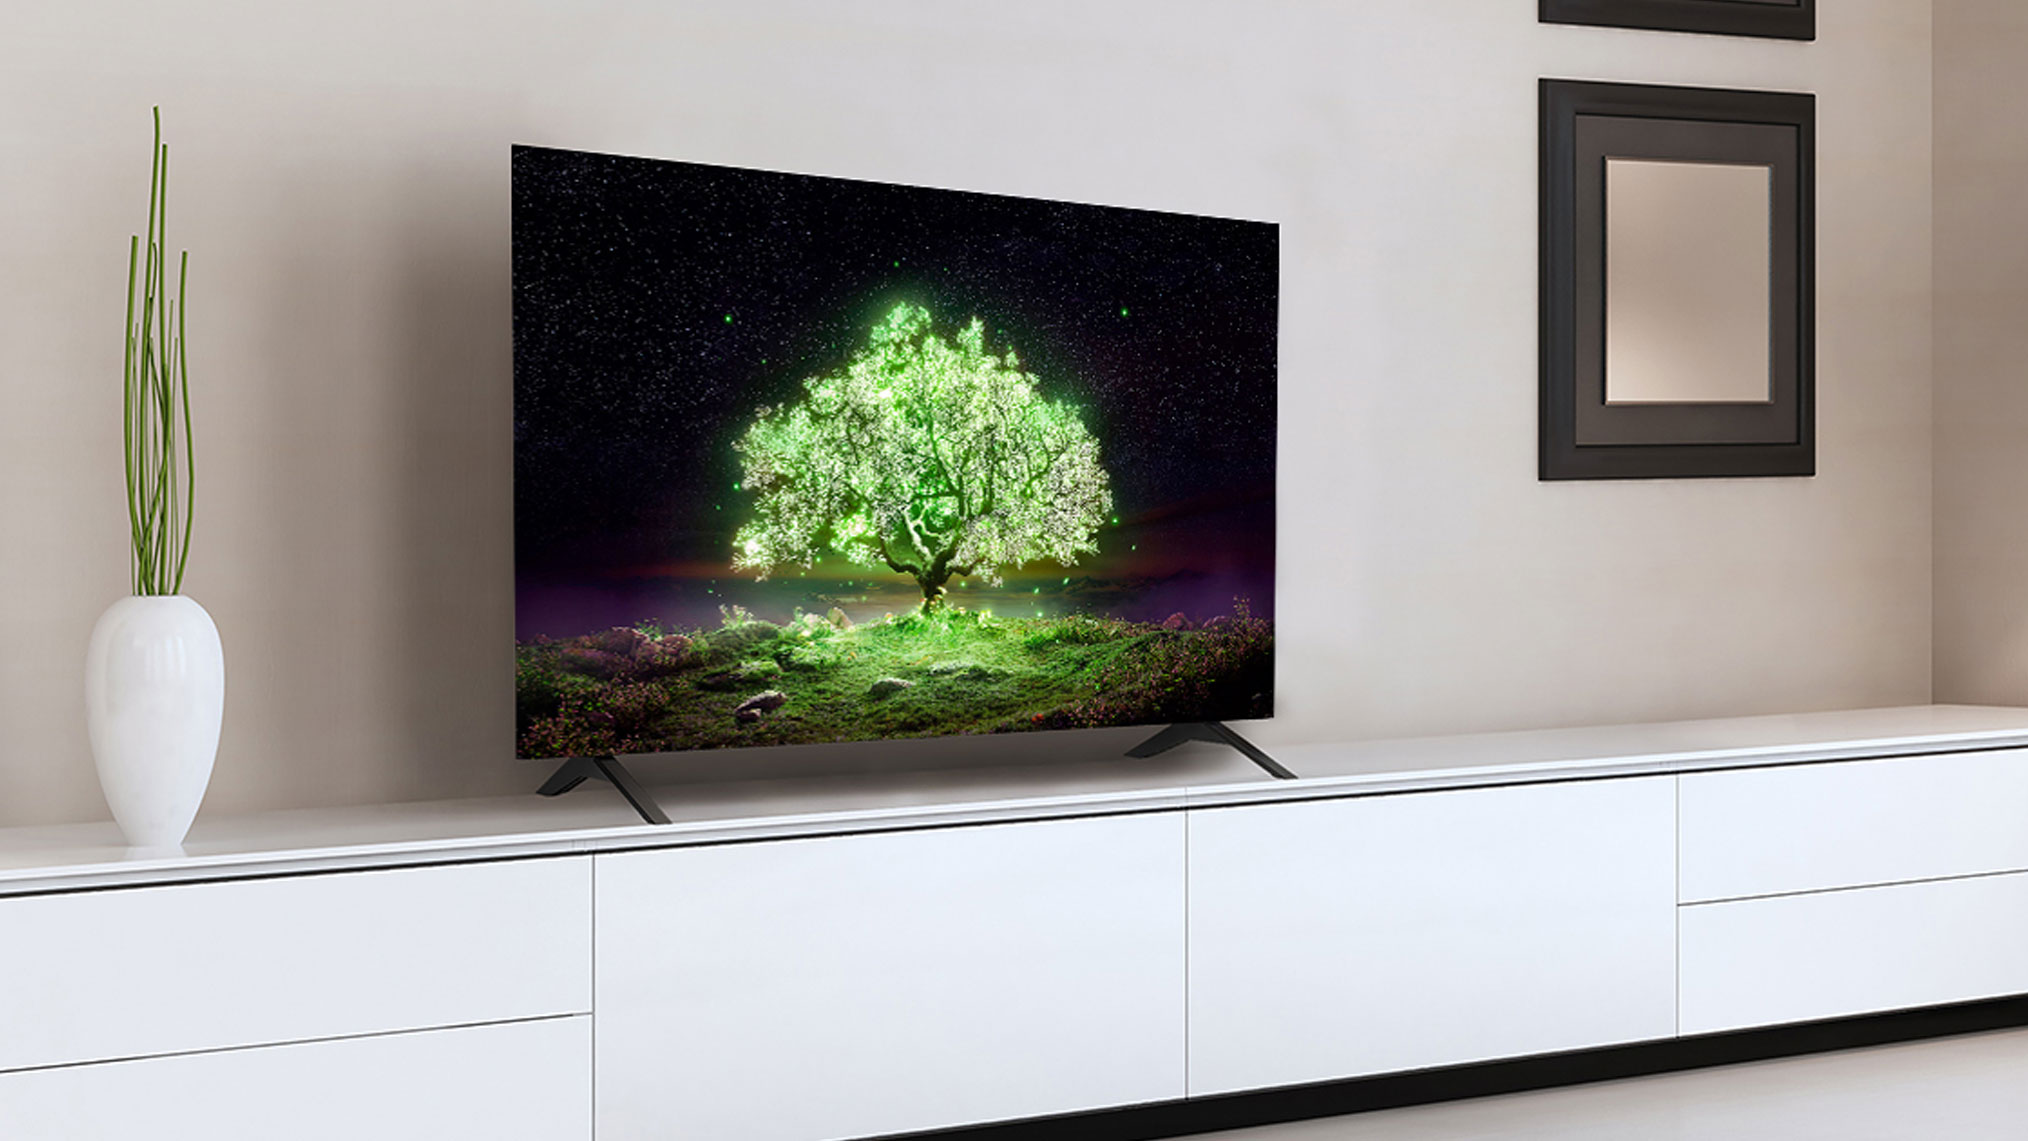 LG A1 OLED showing green tree on display, sitting on white countertop